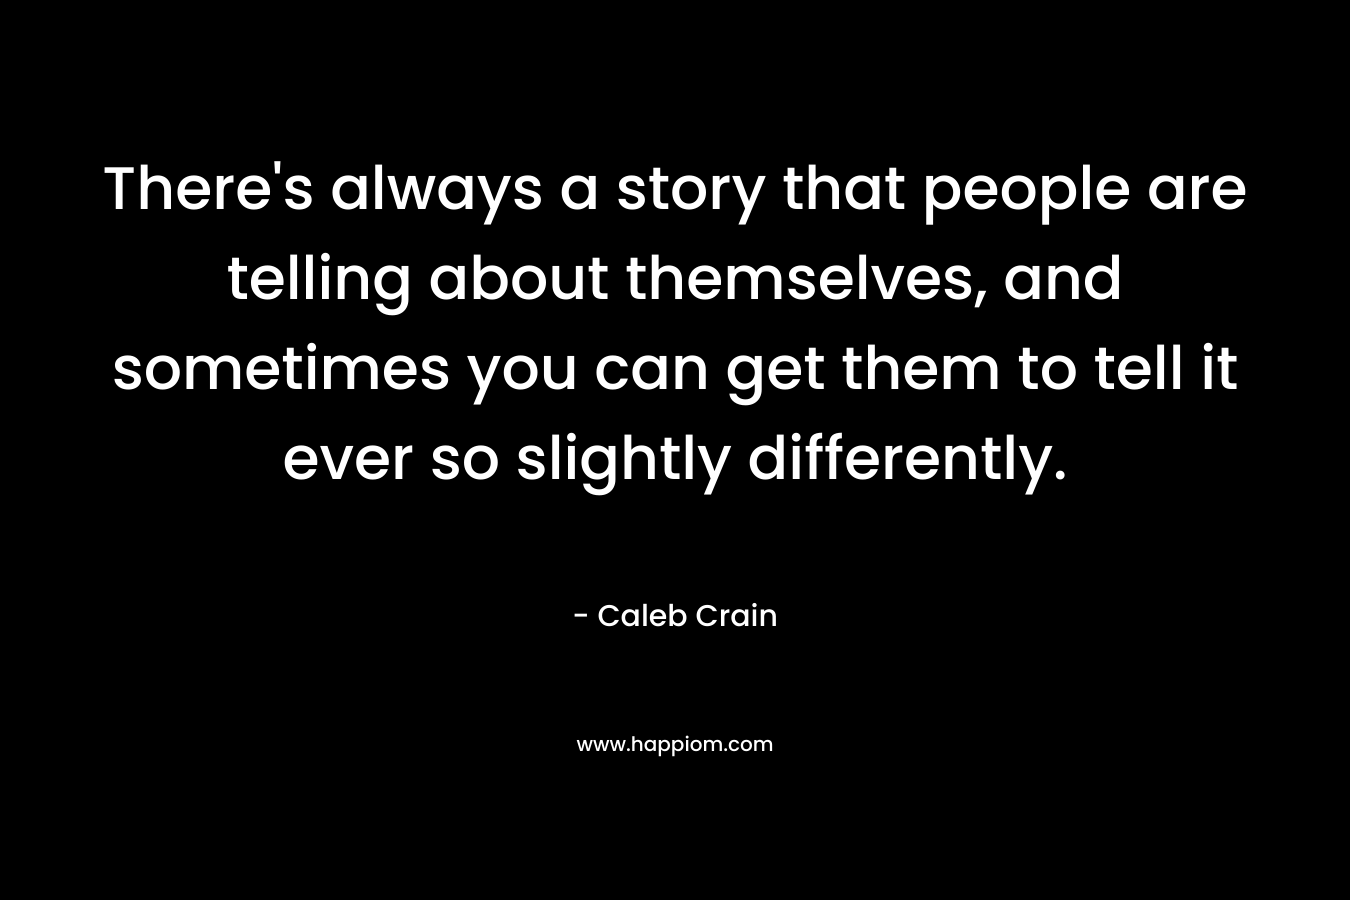 There’s always a story that people are telling about themselves, and sometimes you can get them to tell it ever so slightly differently. – Caleb Crain